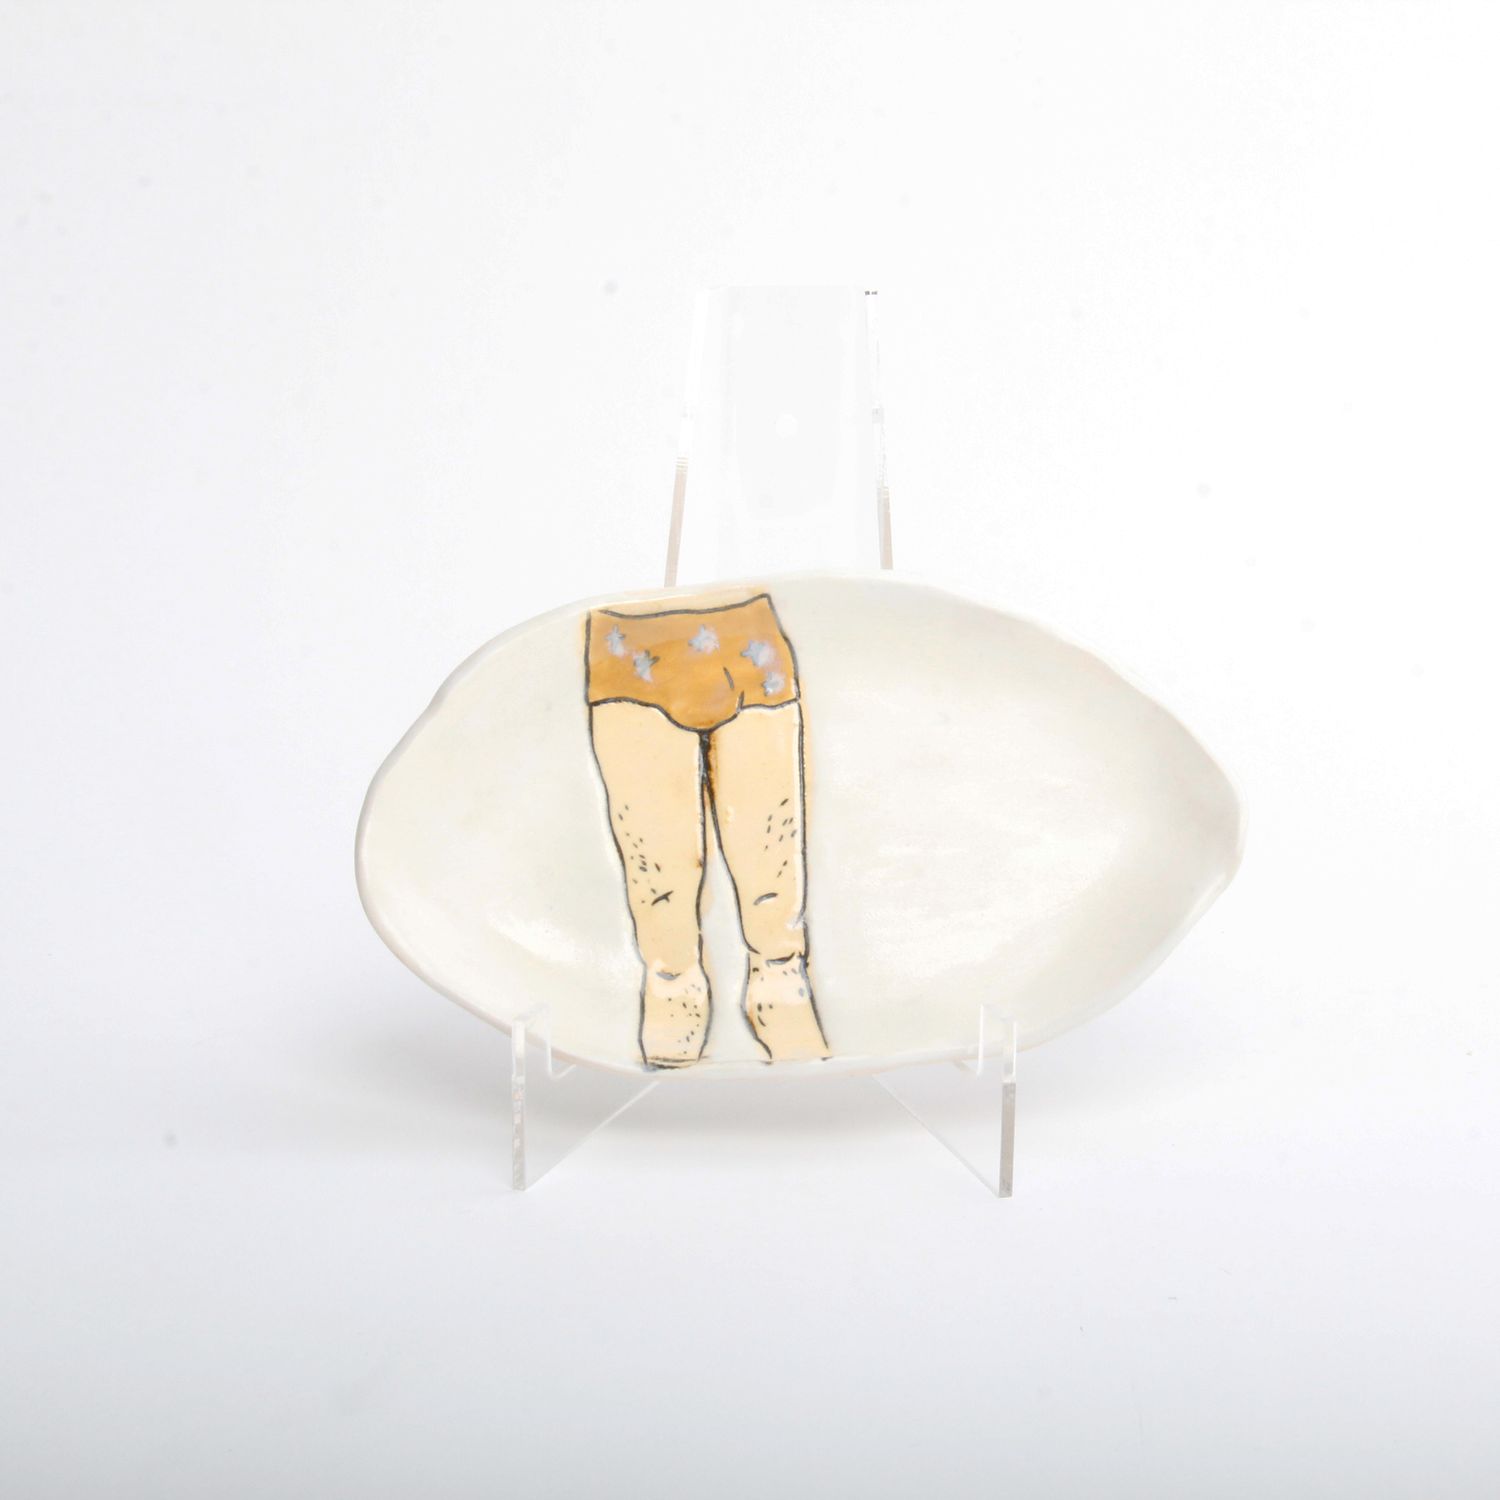 Lindsay Gravelle: Small Swimmer Plate Product Image 1 of 3